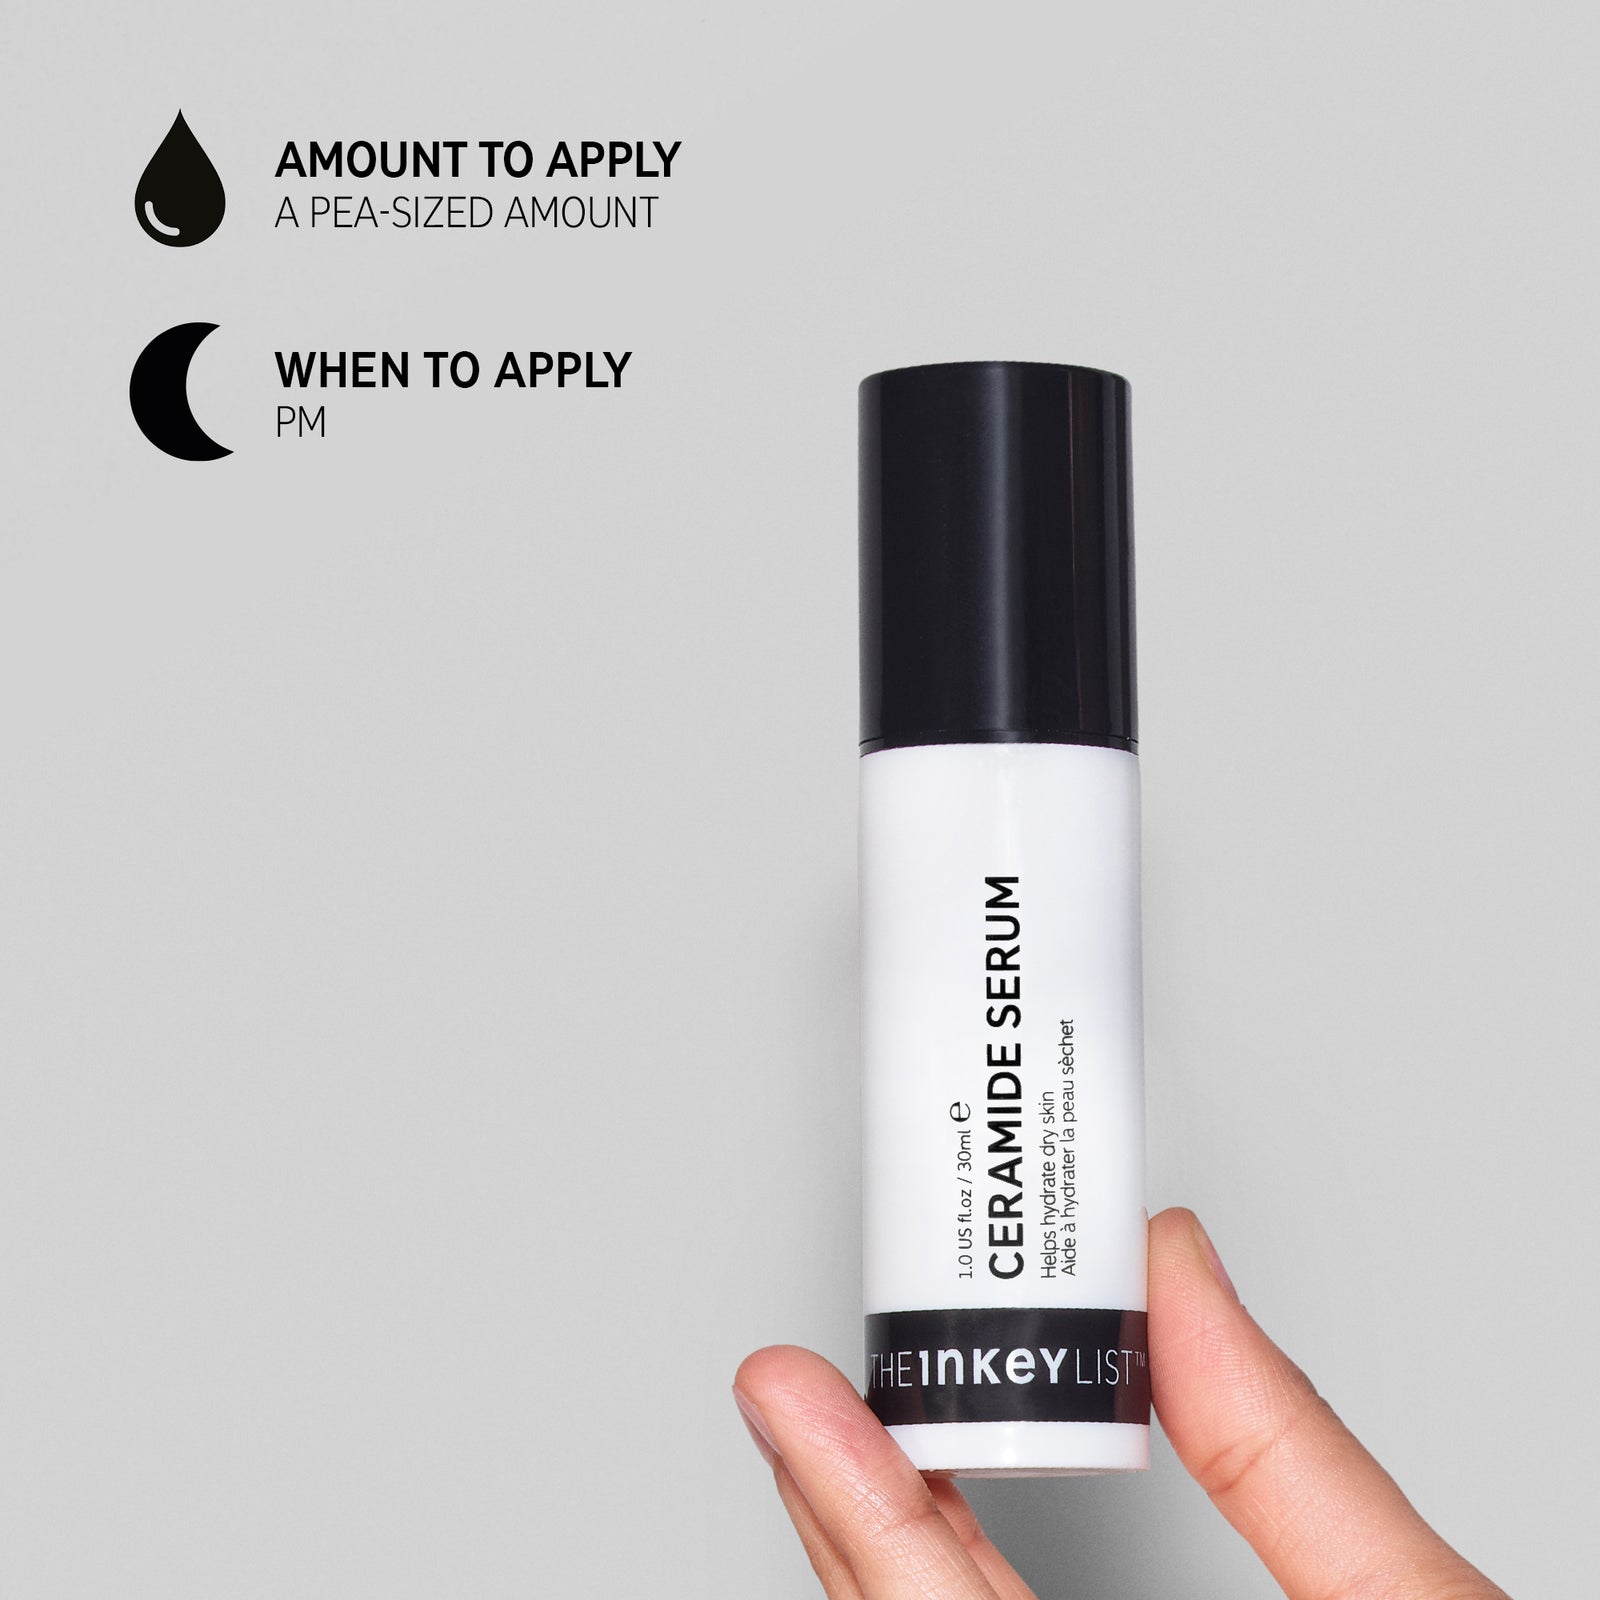 Hand holding Ceramide Serum against a grey background with text on how and when to use it